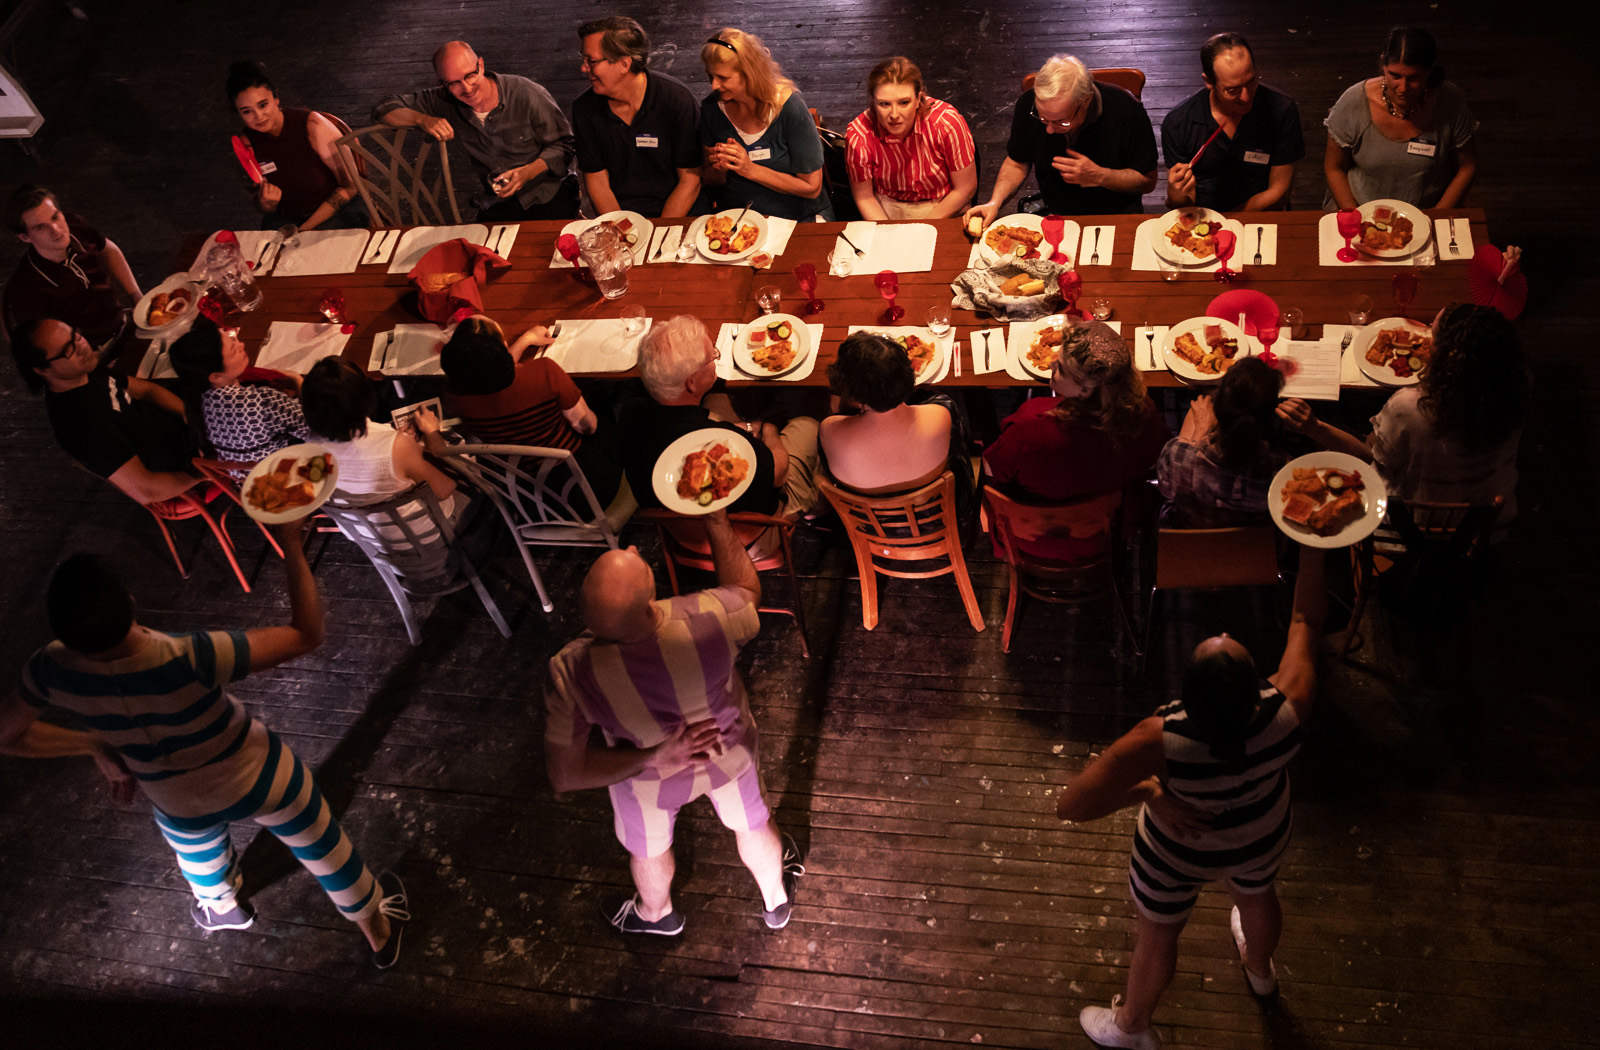 AFTERPARTY: The Rothko Studio 2019 production. The dancer/waiters serve audience memebers dinner at a long table, as seen from above in the mezzanine.